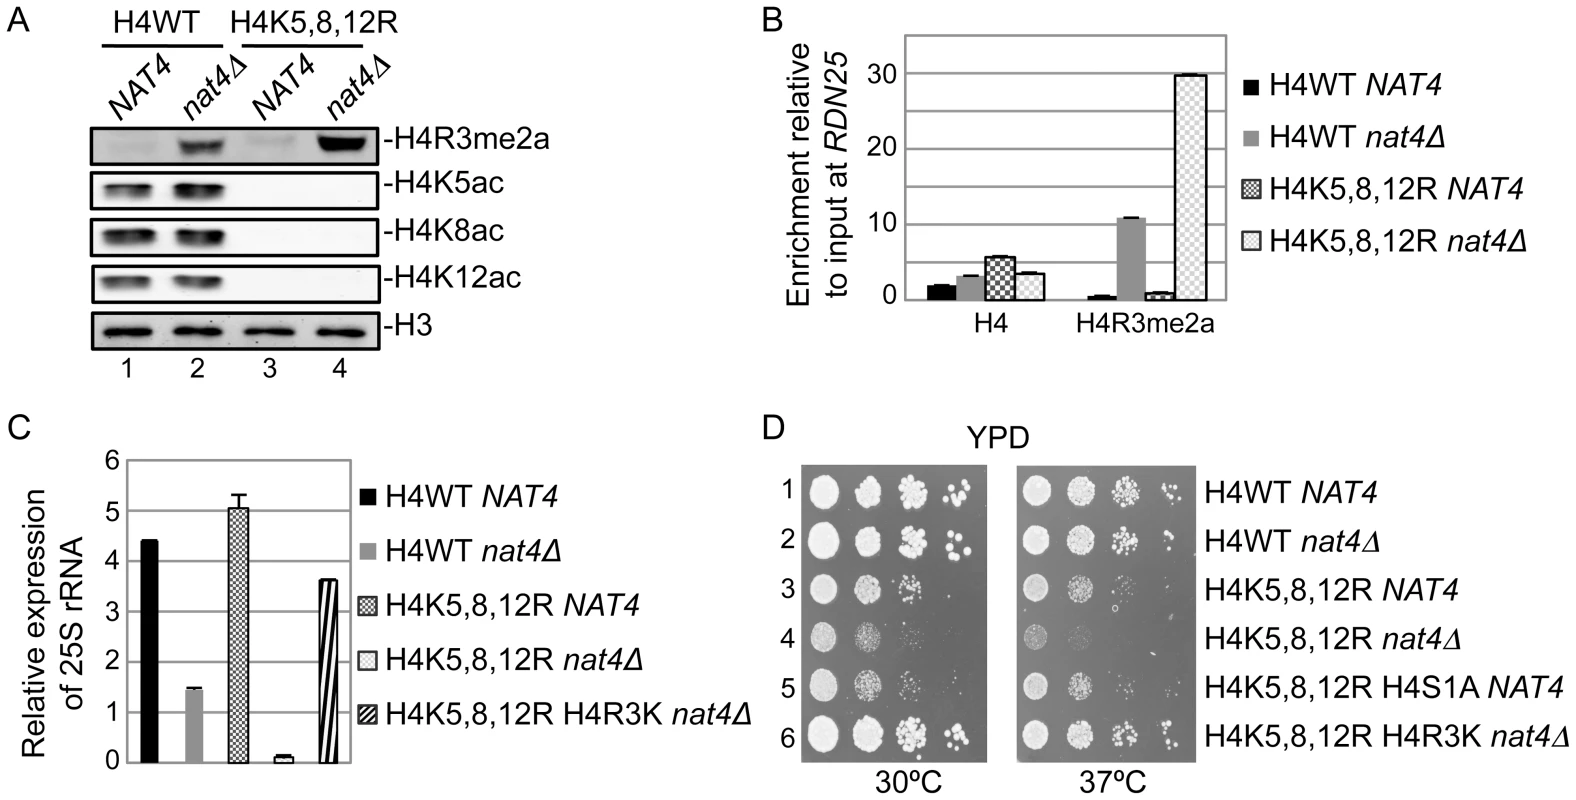 N-acH4 acts synergistically with H4K5, 8, 12 acetylation to control rDNA silencing, H4R3me2a and cell growth.